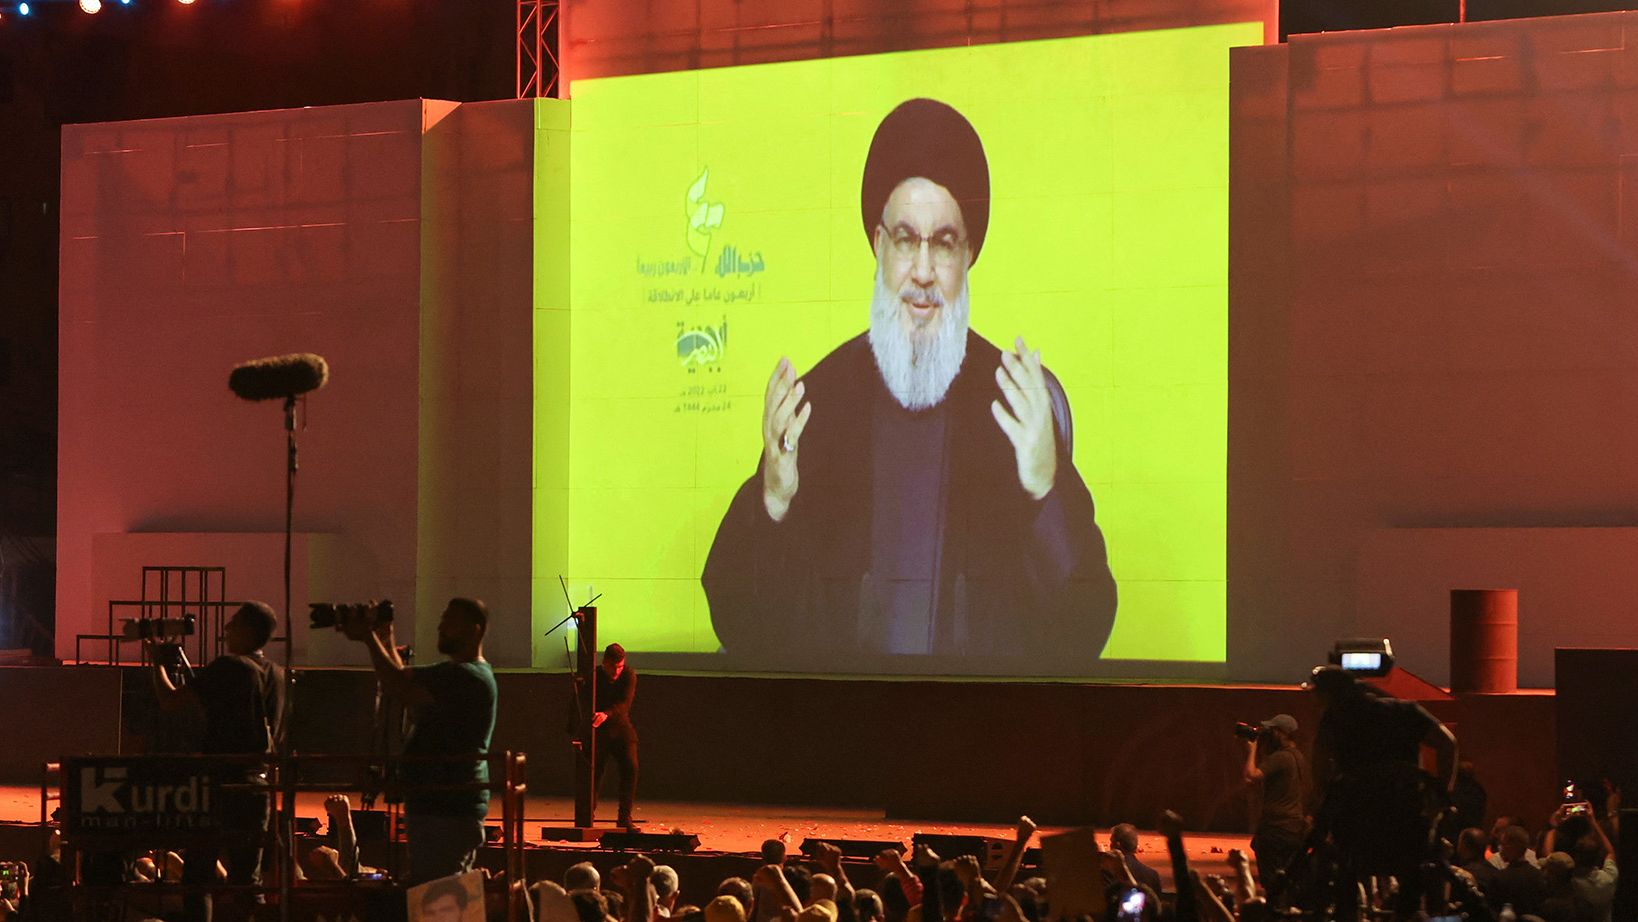 Lebanon's Hezbollah leader Hassan Nasrallah appears on a screen as he addresses his supporters during a rally in Beirut's southern suburbs in Lebanon on Monday.